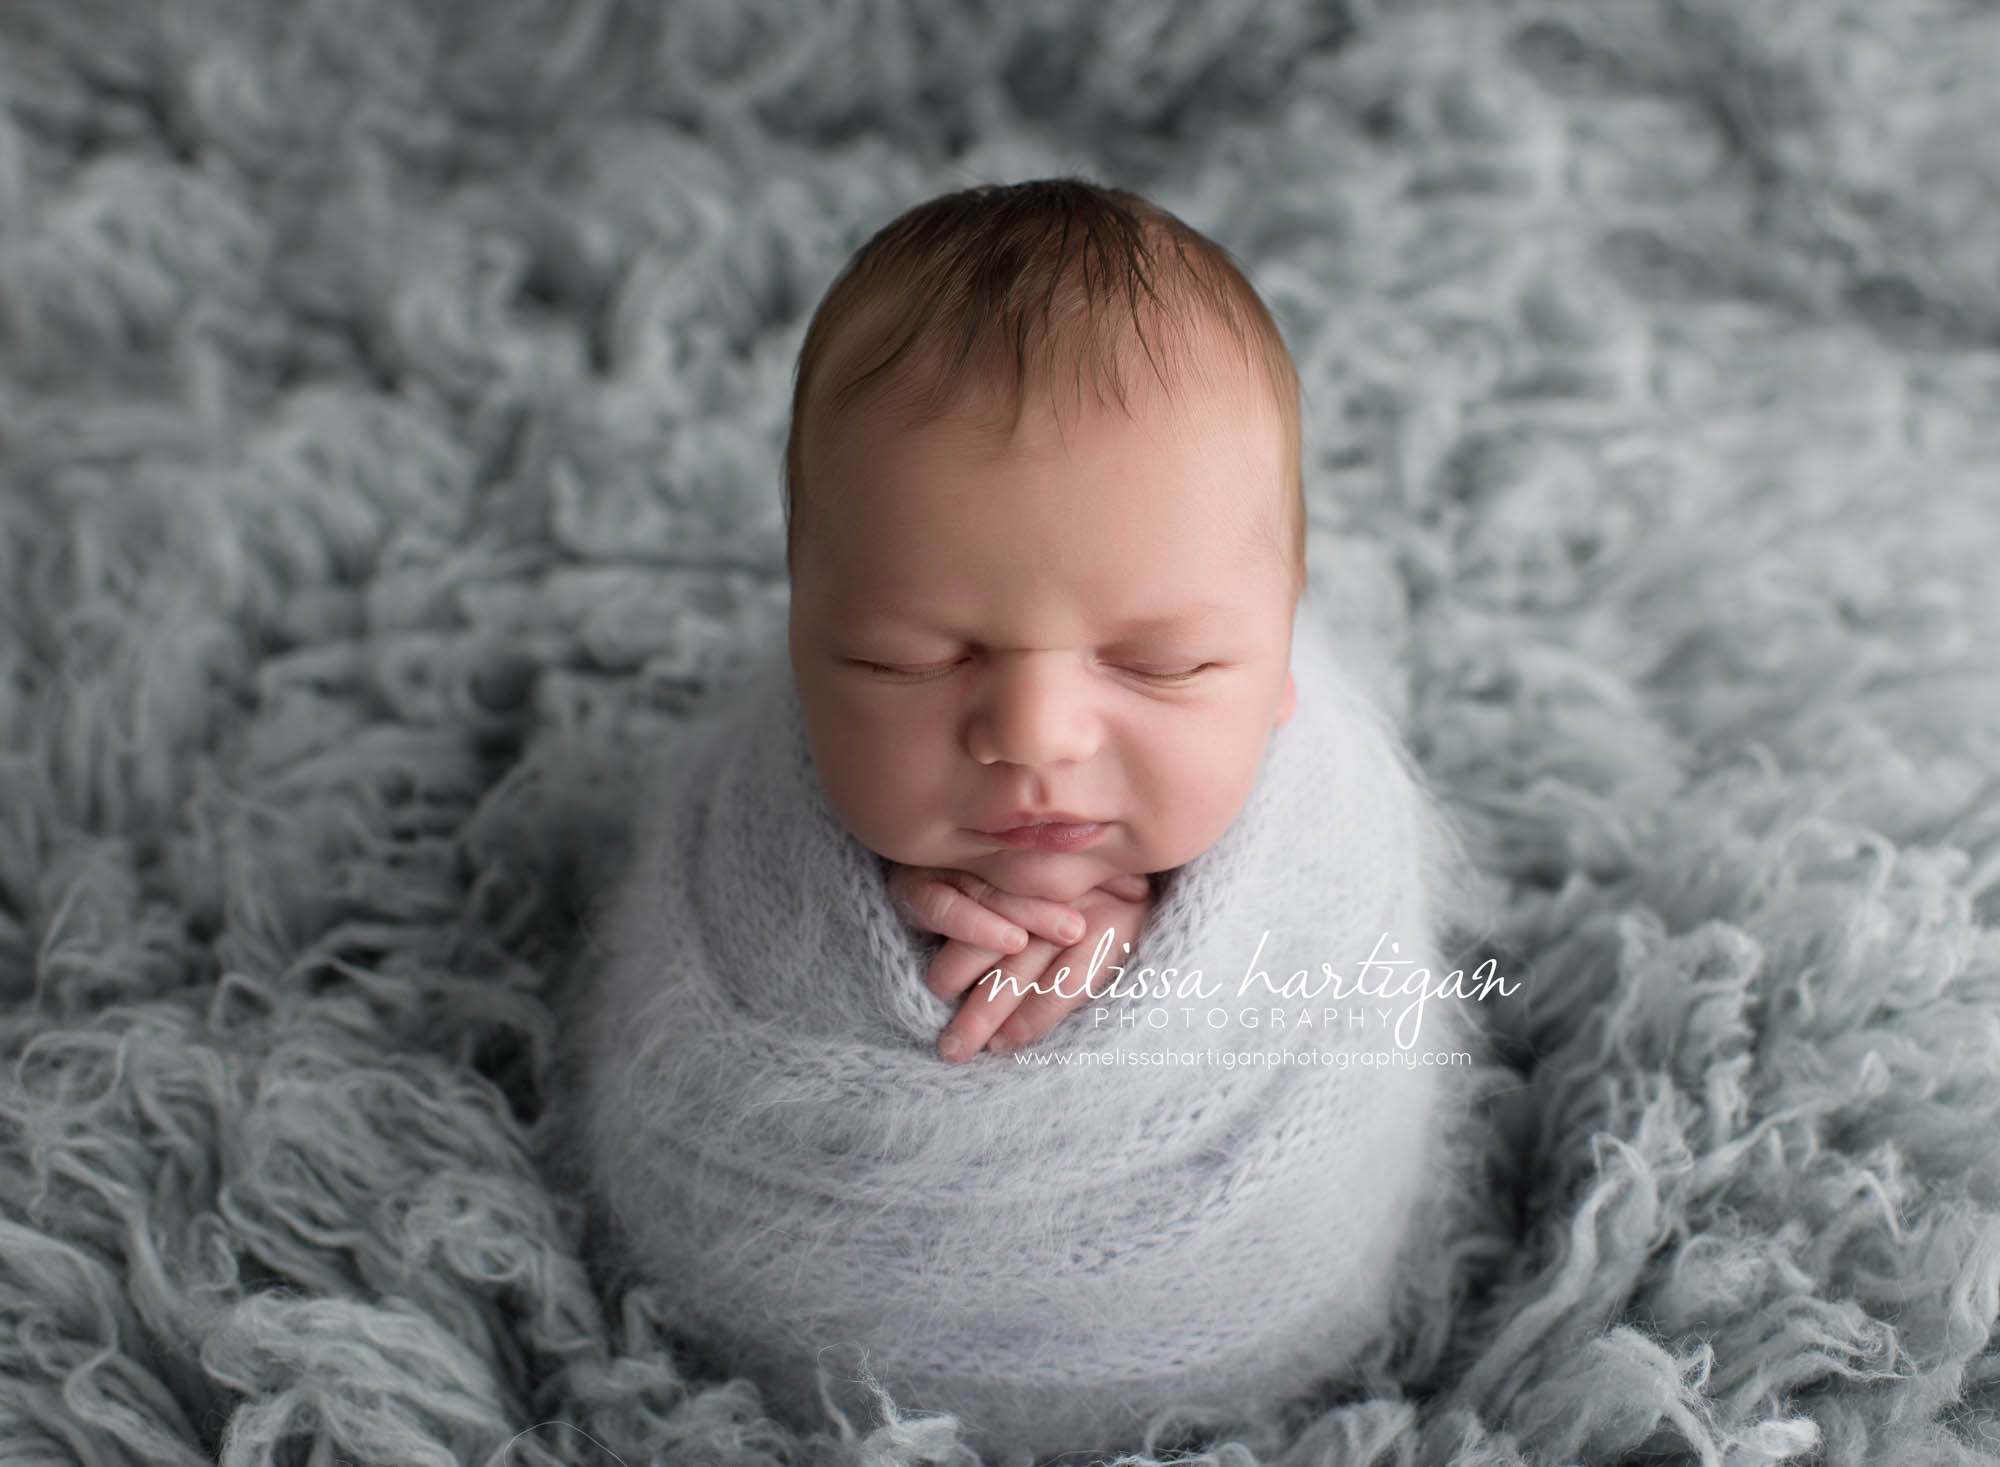 Melissa Hartigan Photography Coventry CT Simply Swaddled Newborn Session baby boy wrapped in pale blue knit on blue flokati